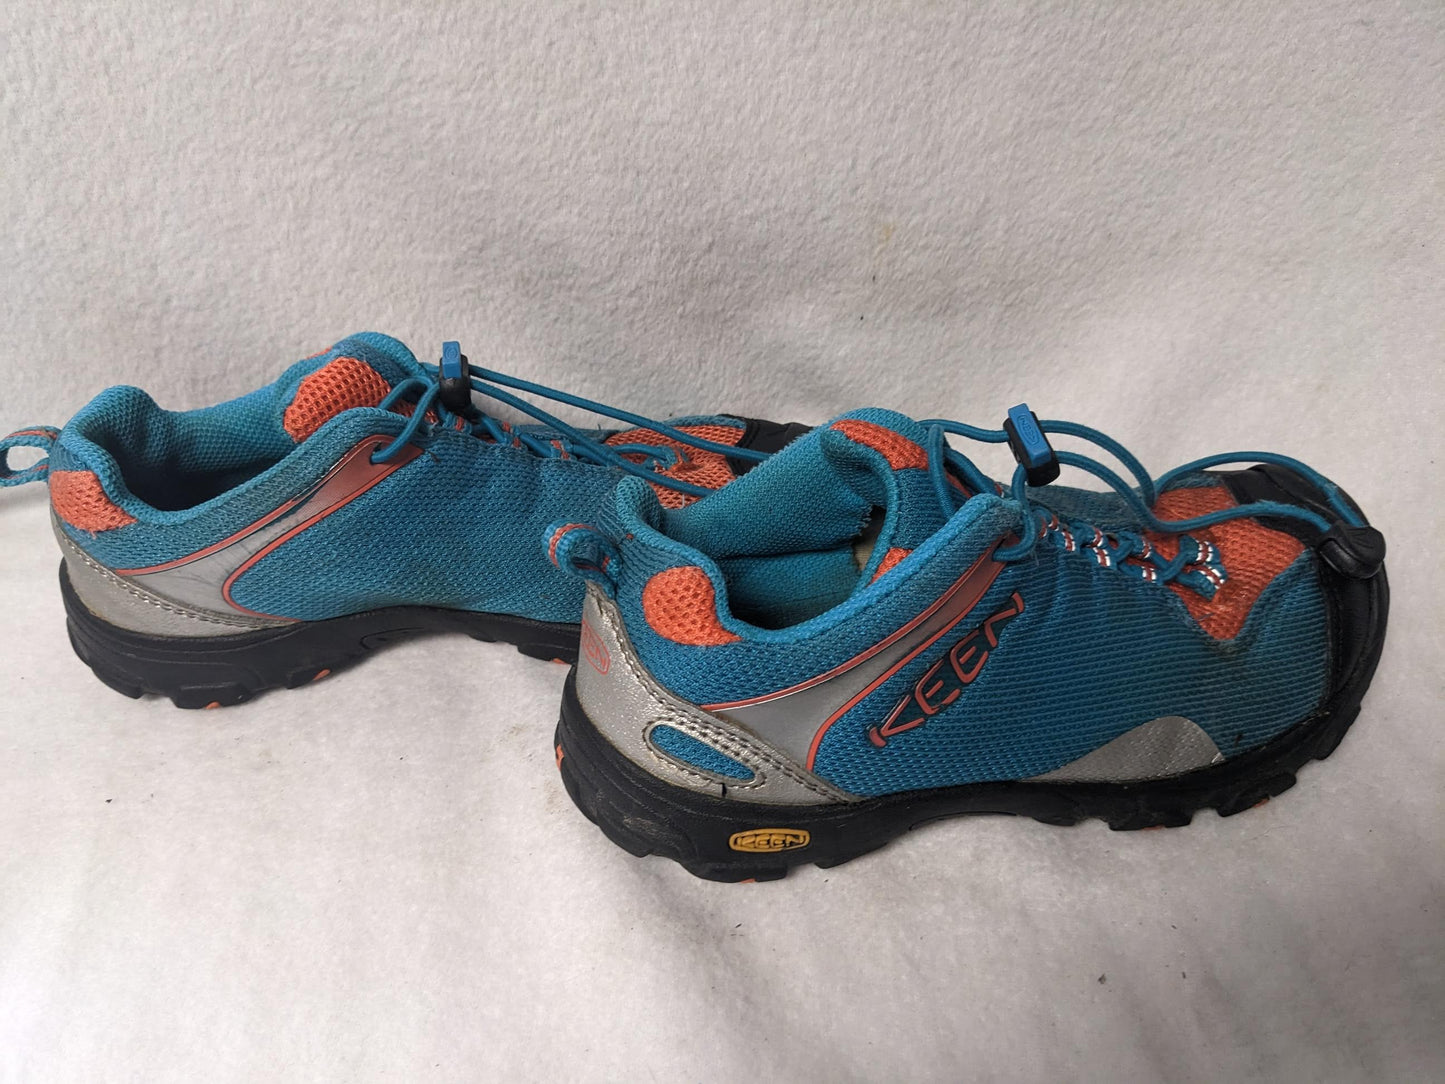 Keen Women's Trail Hiking Shoes Size 3 Color Turquoise Condition Used